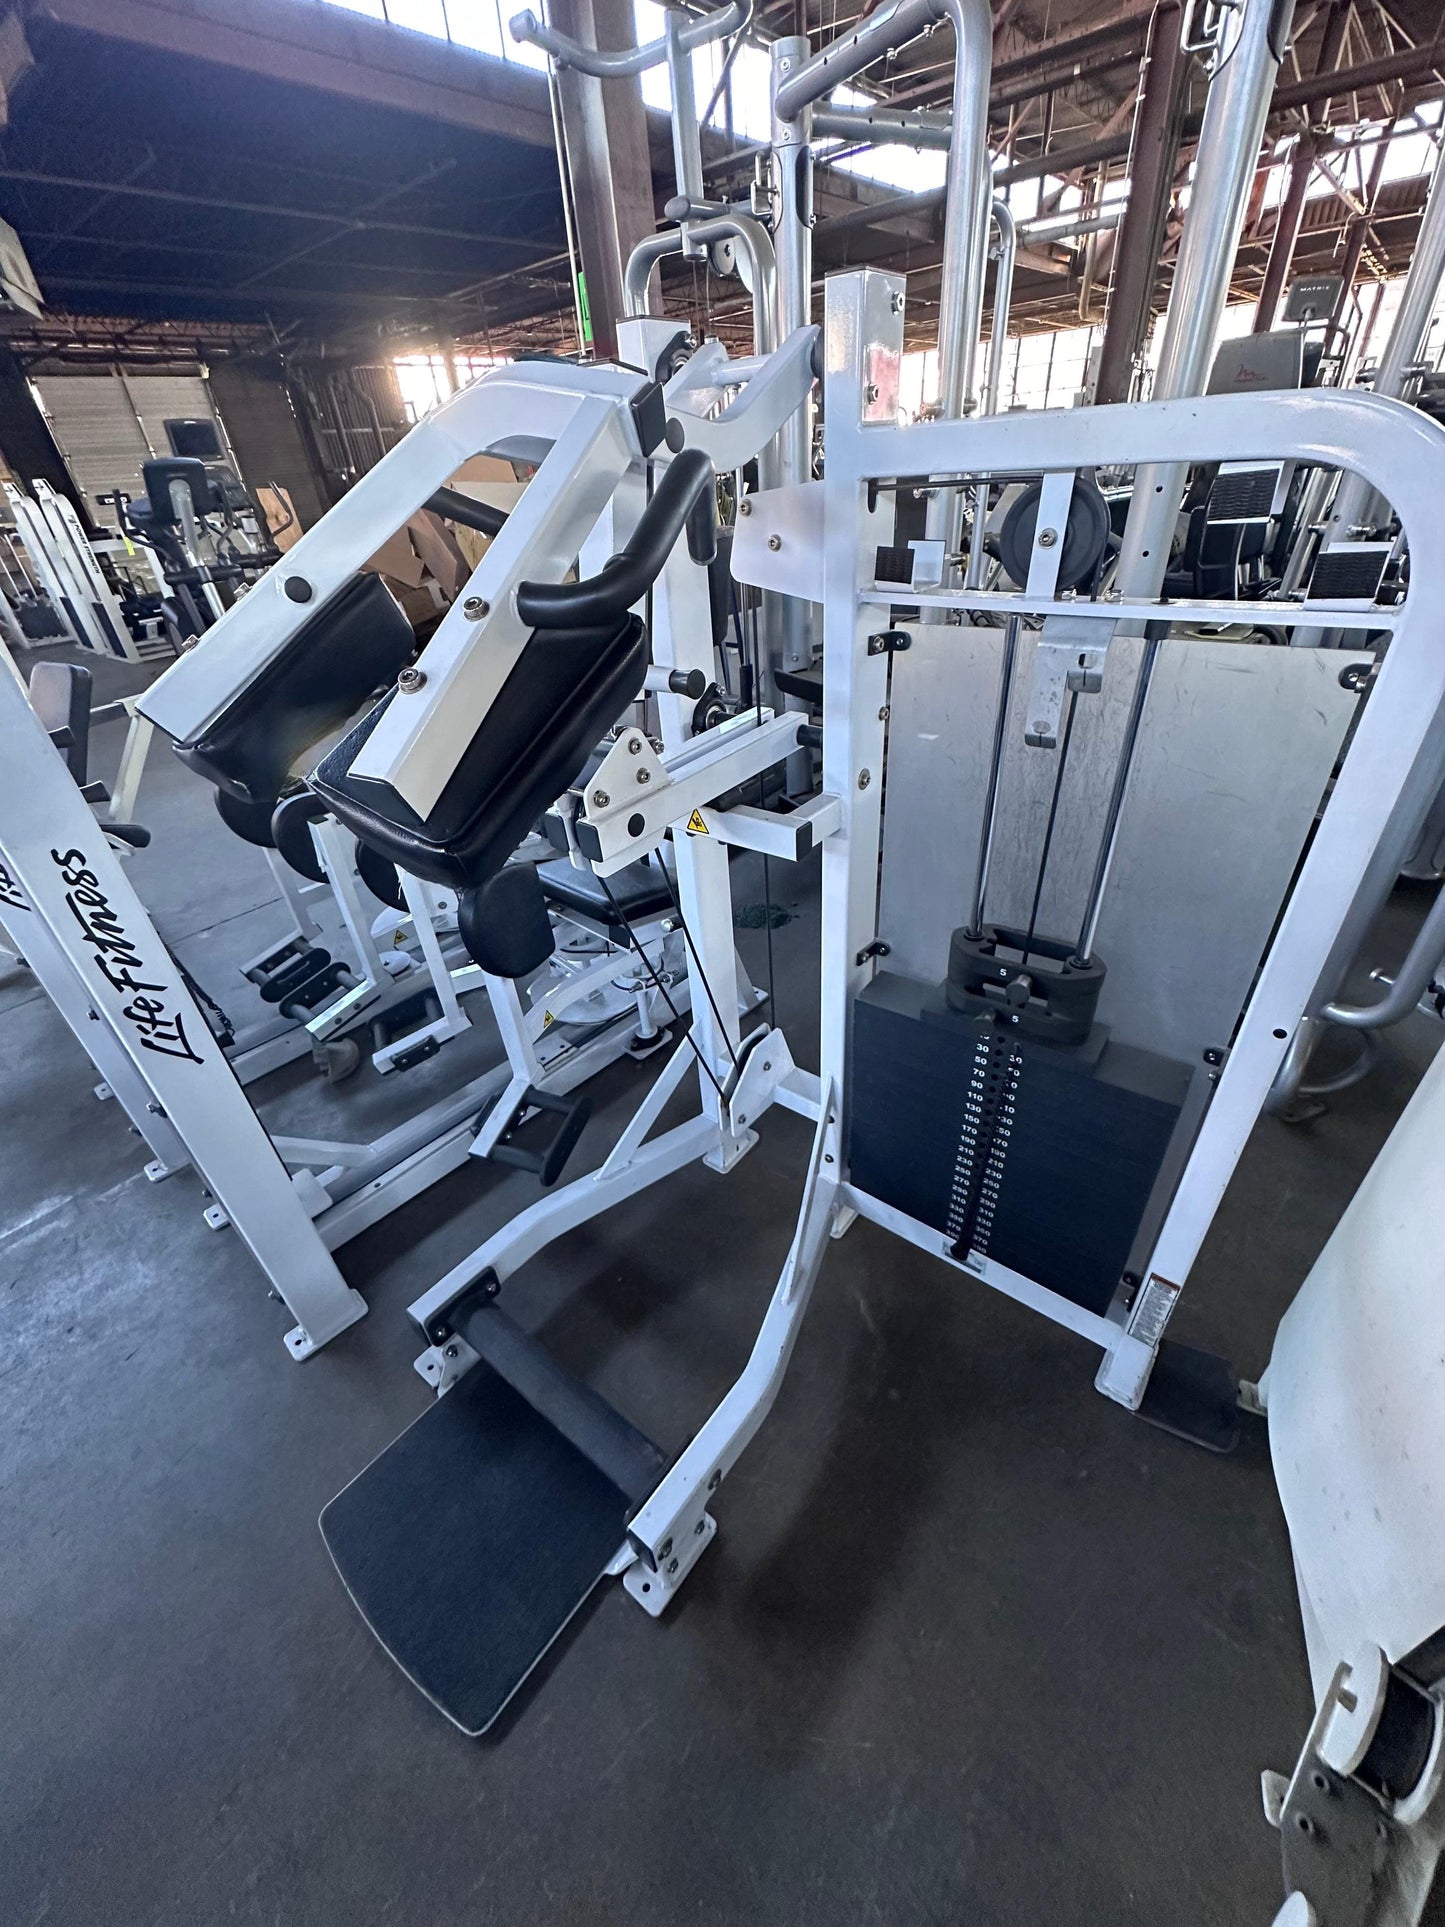 Pre-Owned Life Fitness Selectorized Pro 2 Calf Raise - ExerciseUnlimited